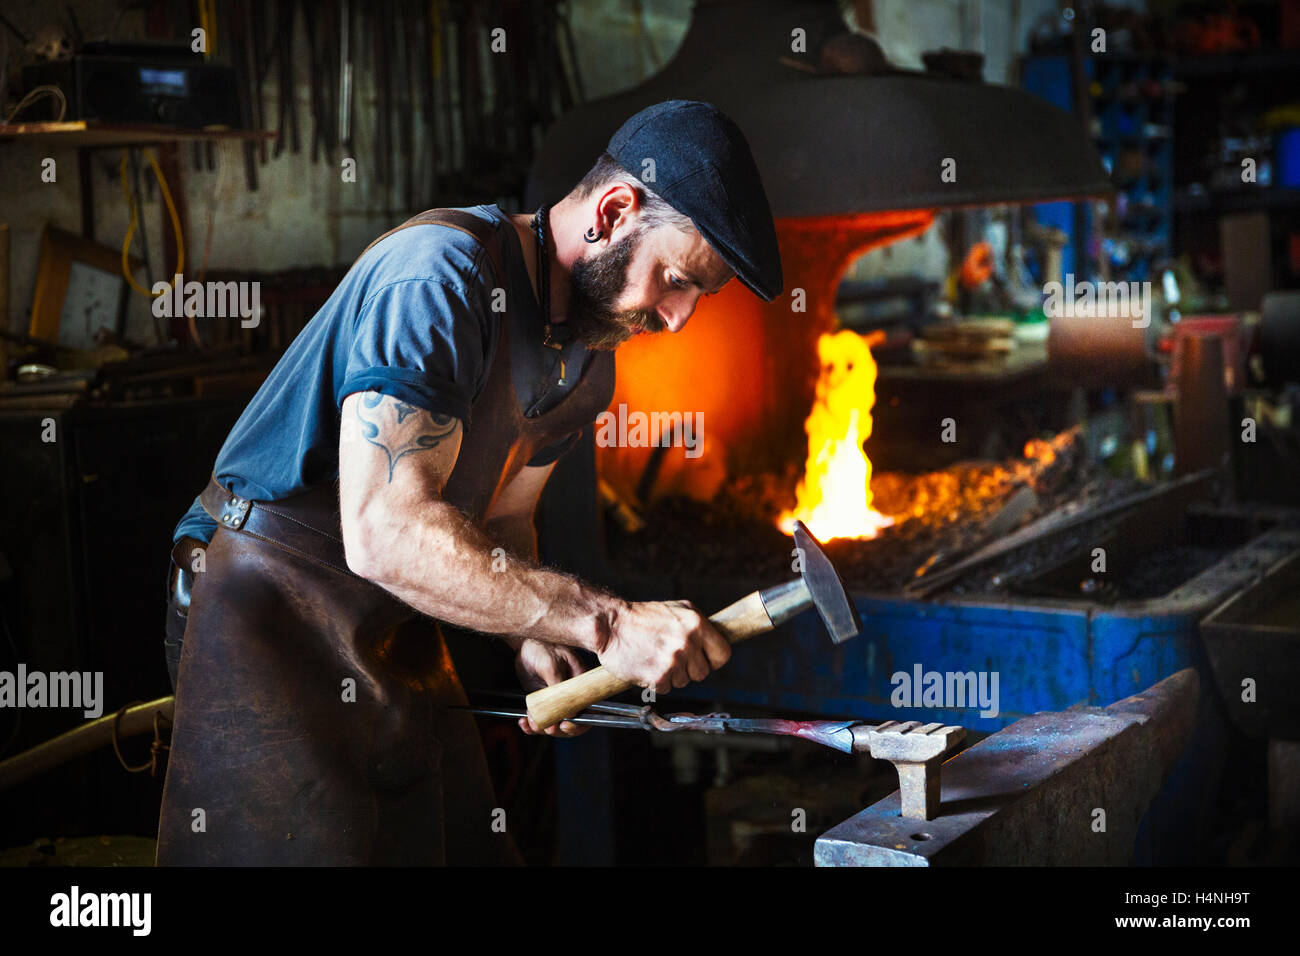 A blacksmith uses complex tools to hammer a cone of red hot metal on anvil in a workshop. Stock Photo